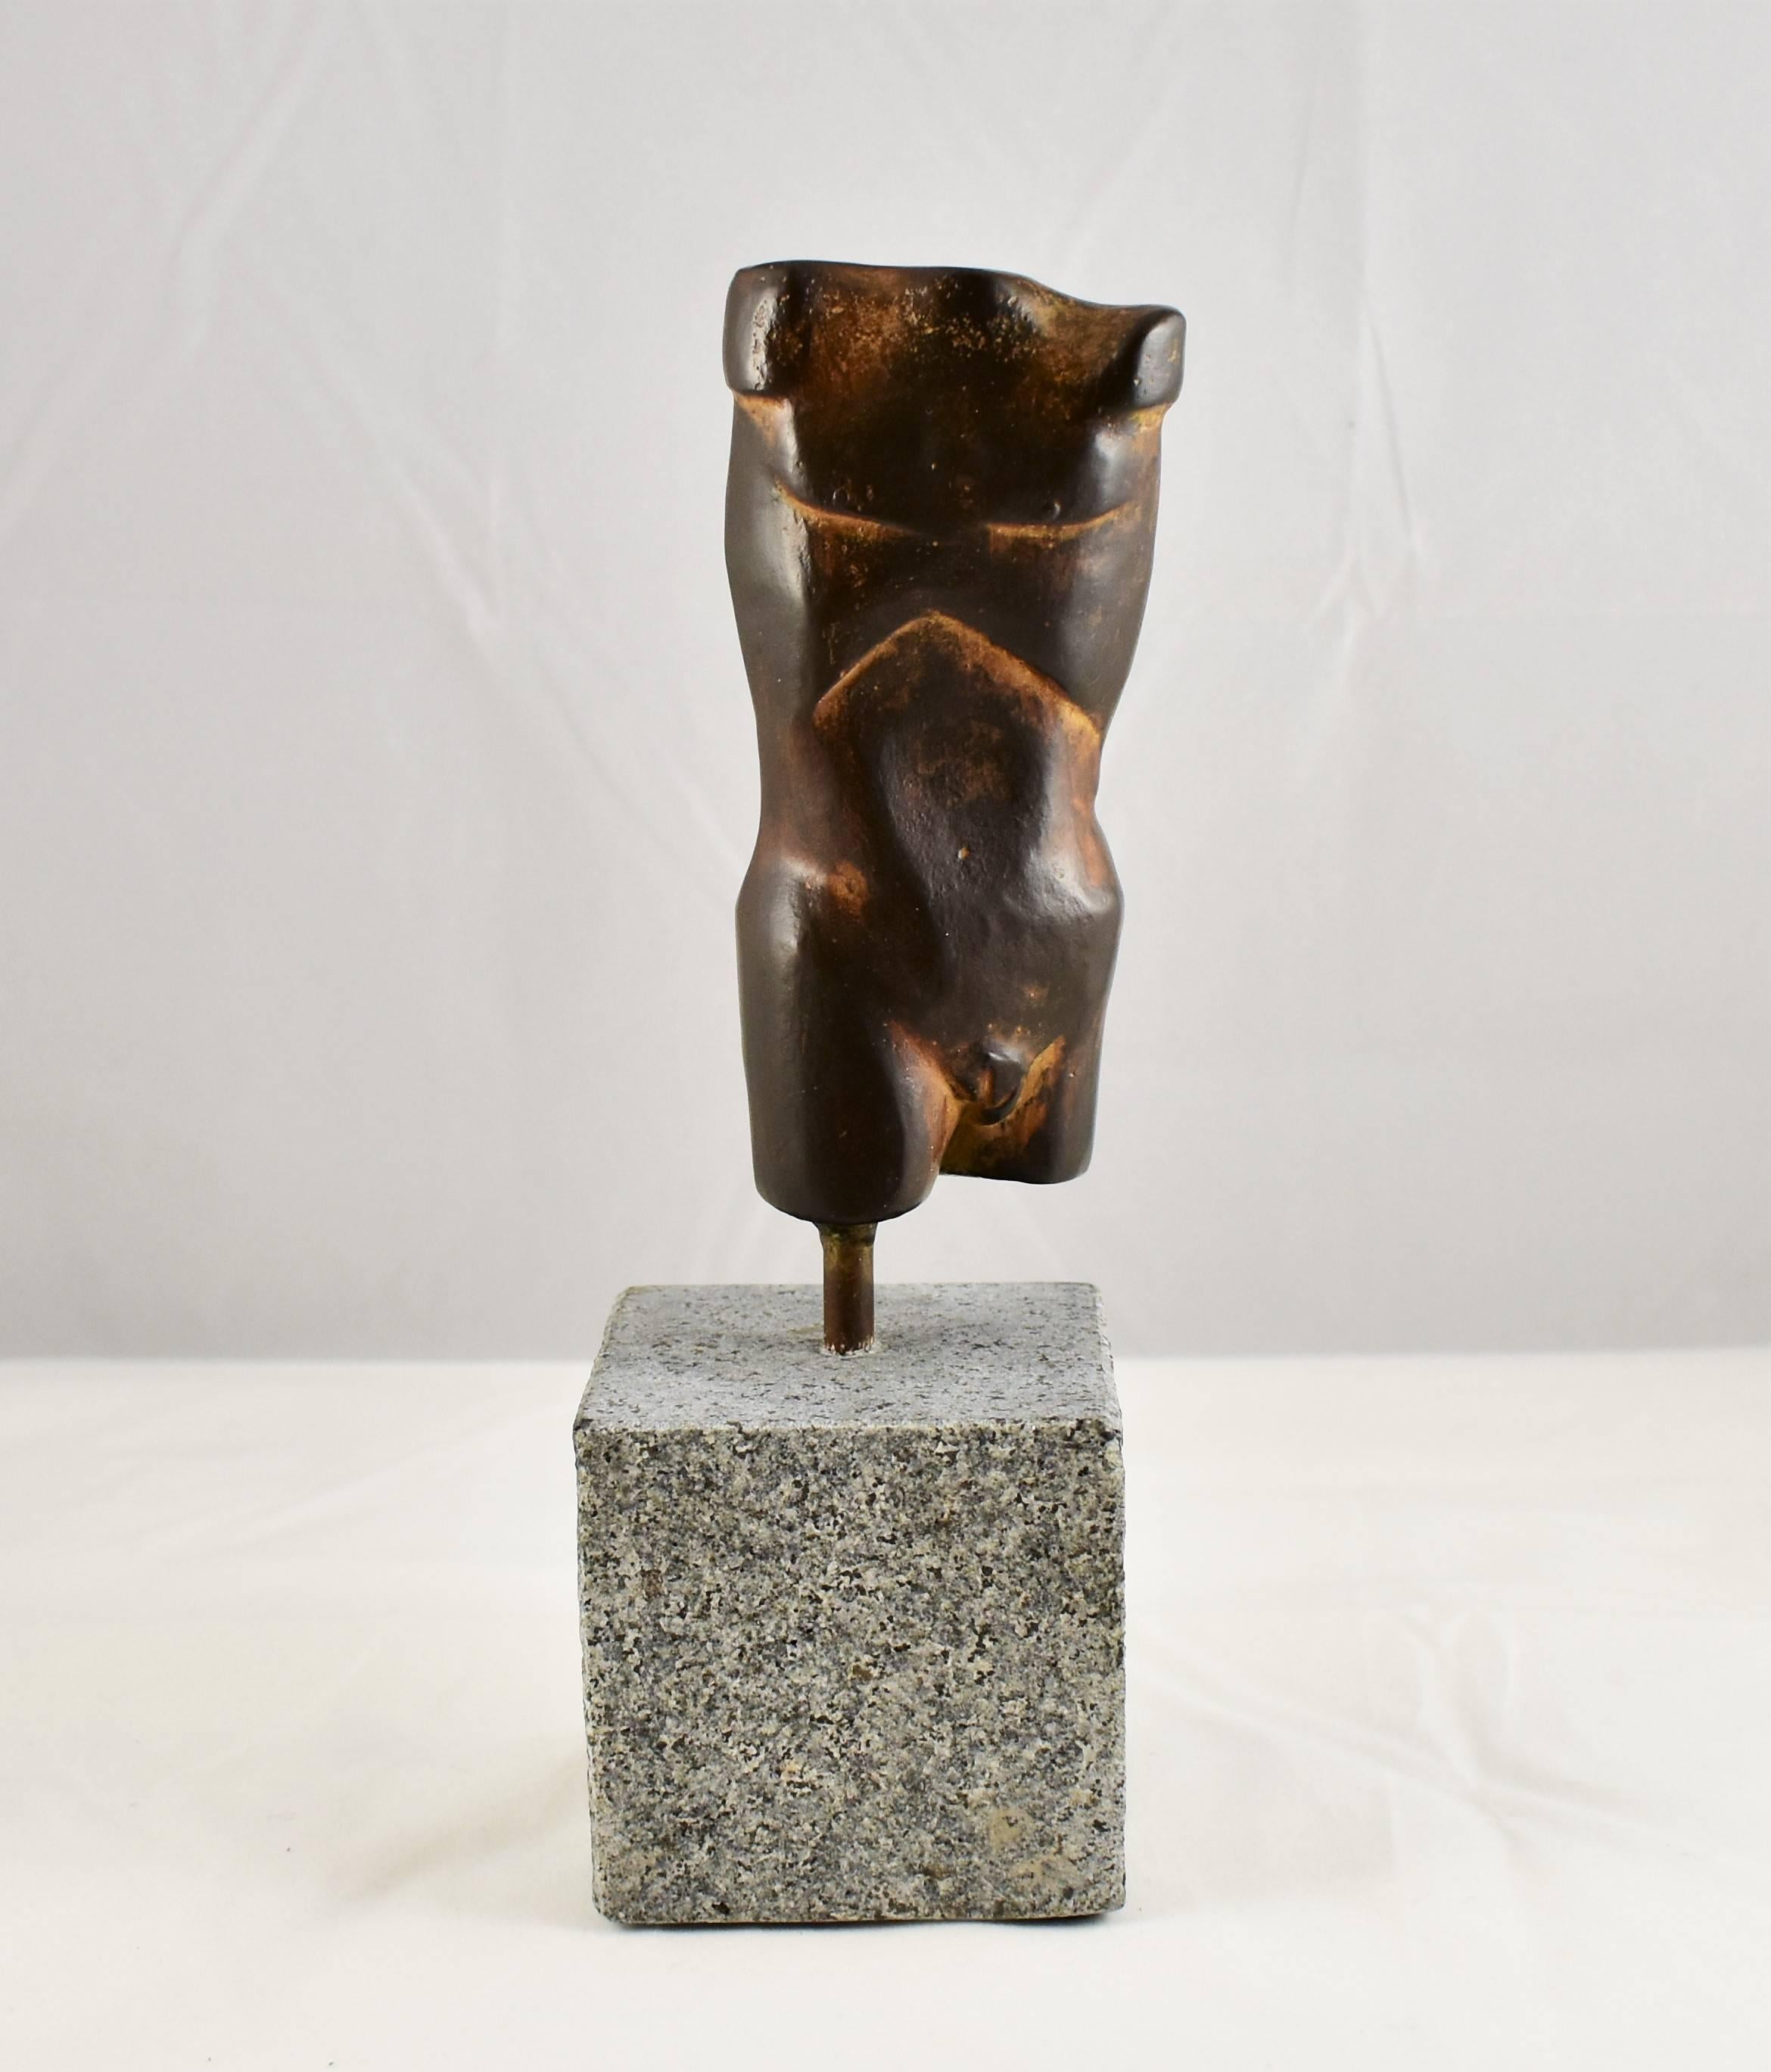 A modern bronze sculpture of a male form/torso with a Rust and Ochre Patina finish. Hand made by the artist then hand cast. Modernistic and artistic design capturing the essence of the male form with masculine lines, beautiful from every angle.